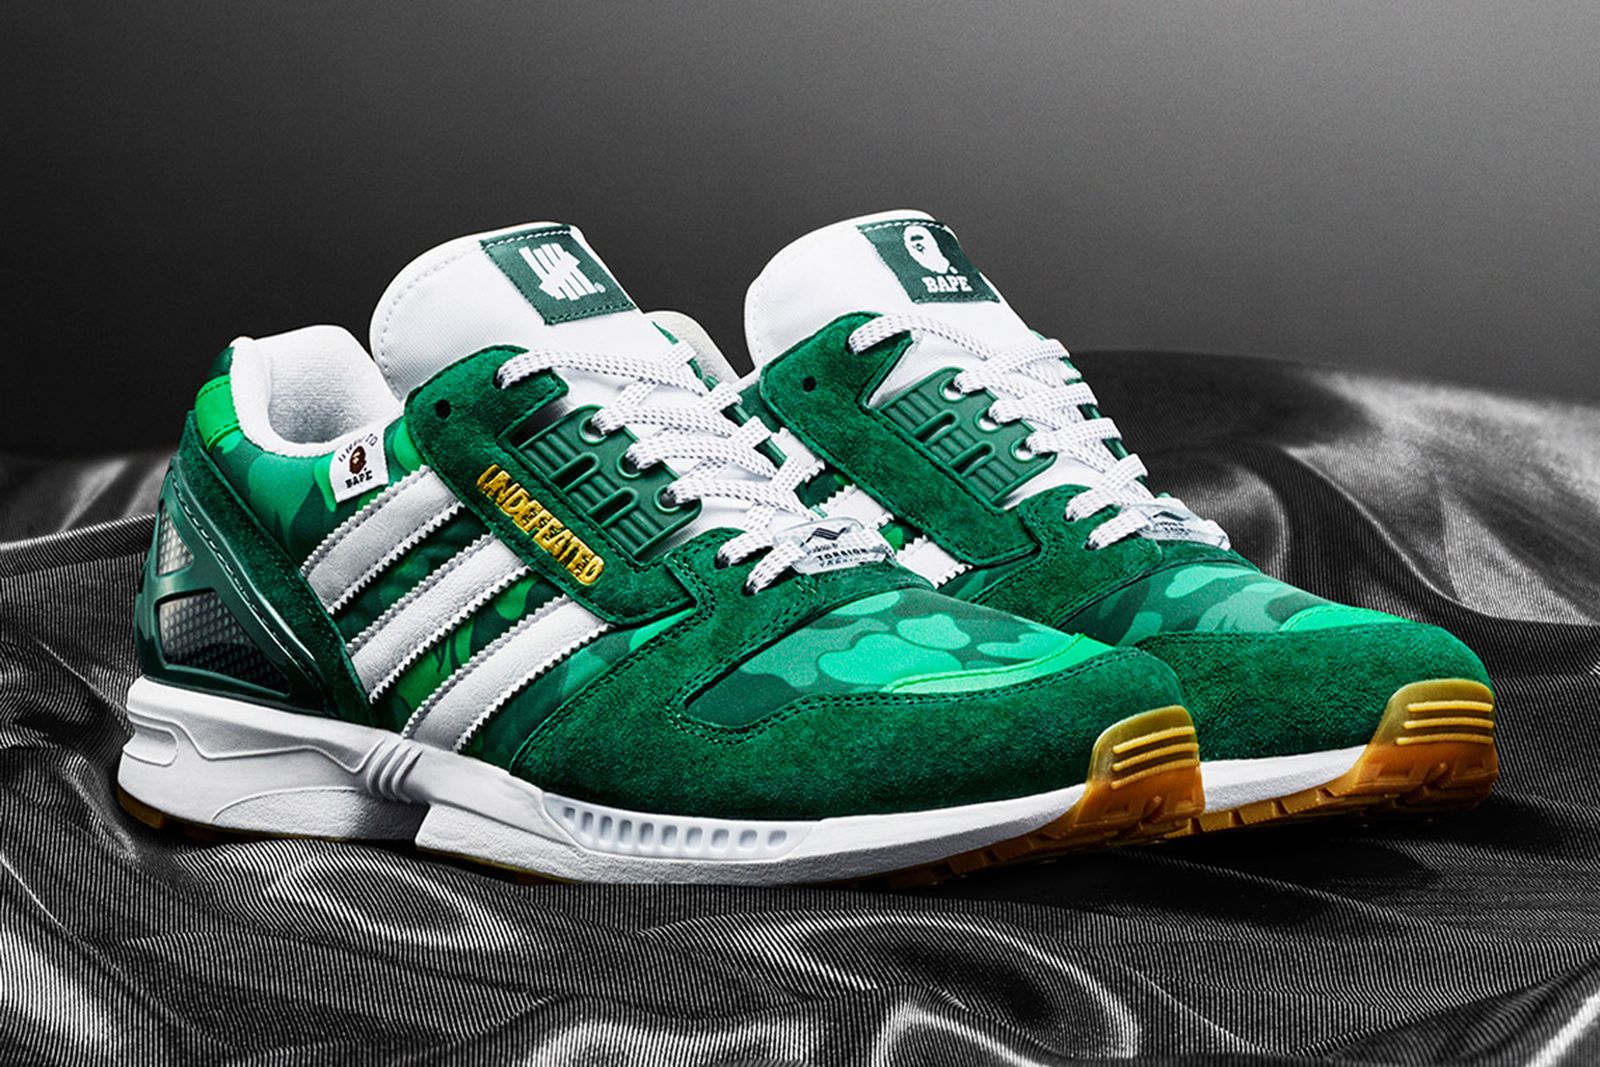 BAPE, UNDFTD & adidas Align for New ZX 8000 Colorways